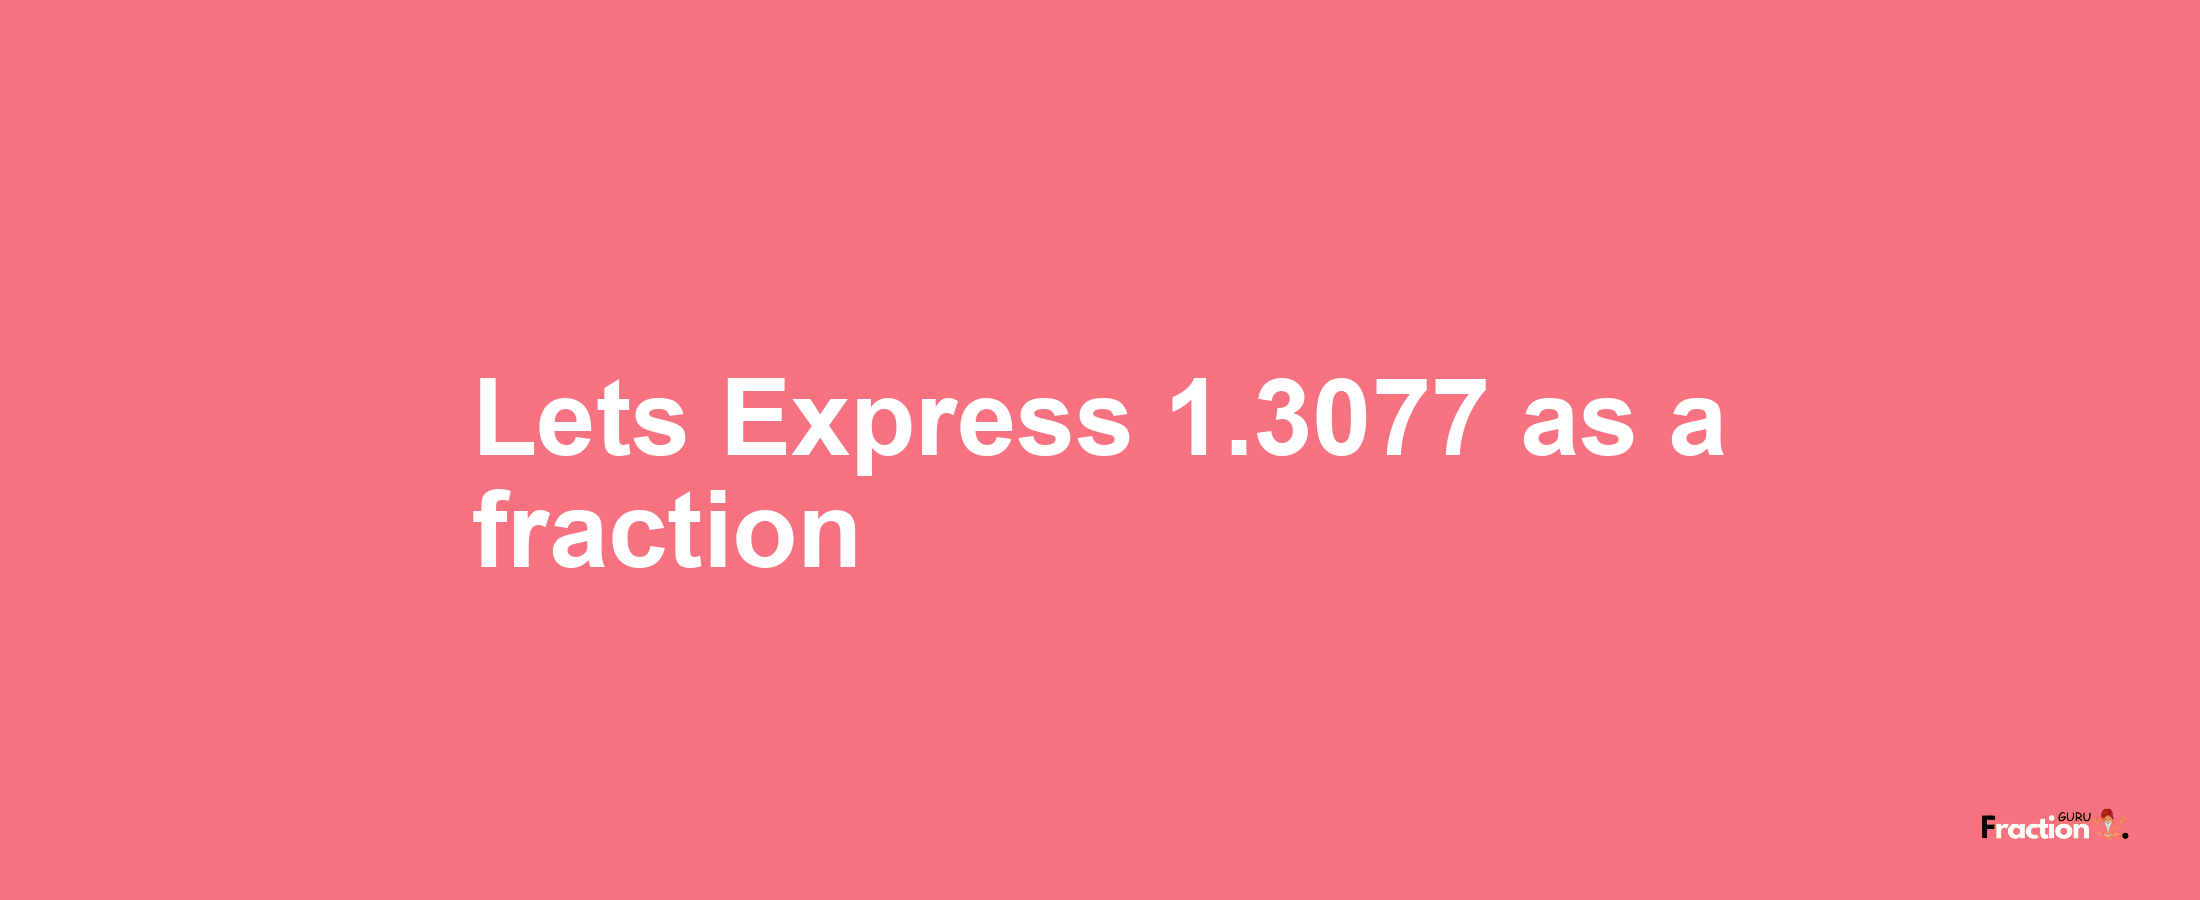 Lets Express 1.3077 as afraction